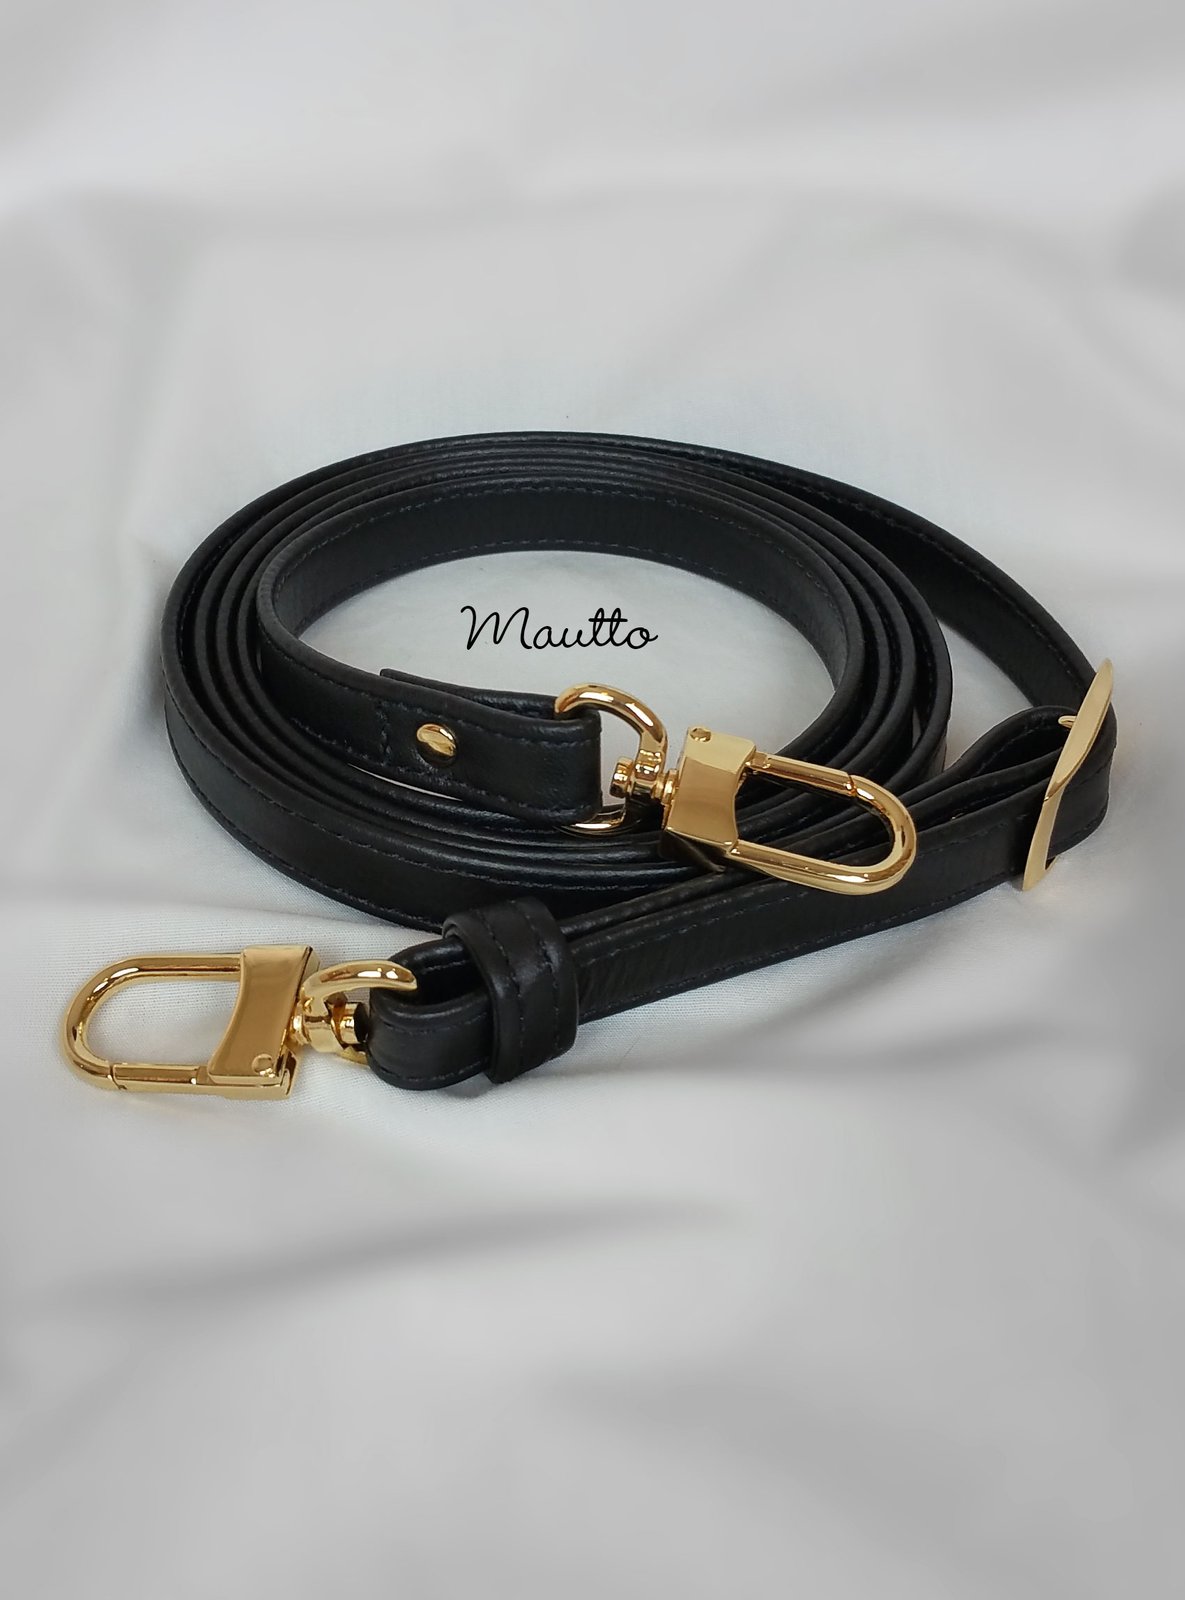 Black Leather Strap for Louis Vuitton Eva/alma/etc 1/2 Inch 13mm Wide  Adjustable Shoulder to Crossbody Length -  Canada